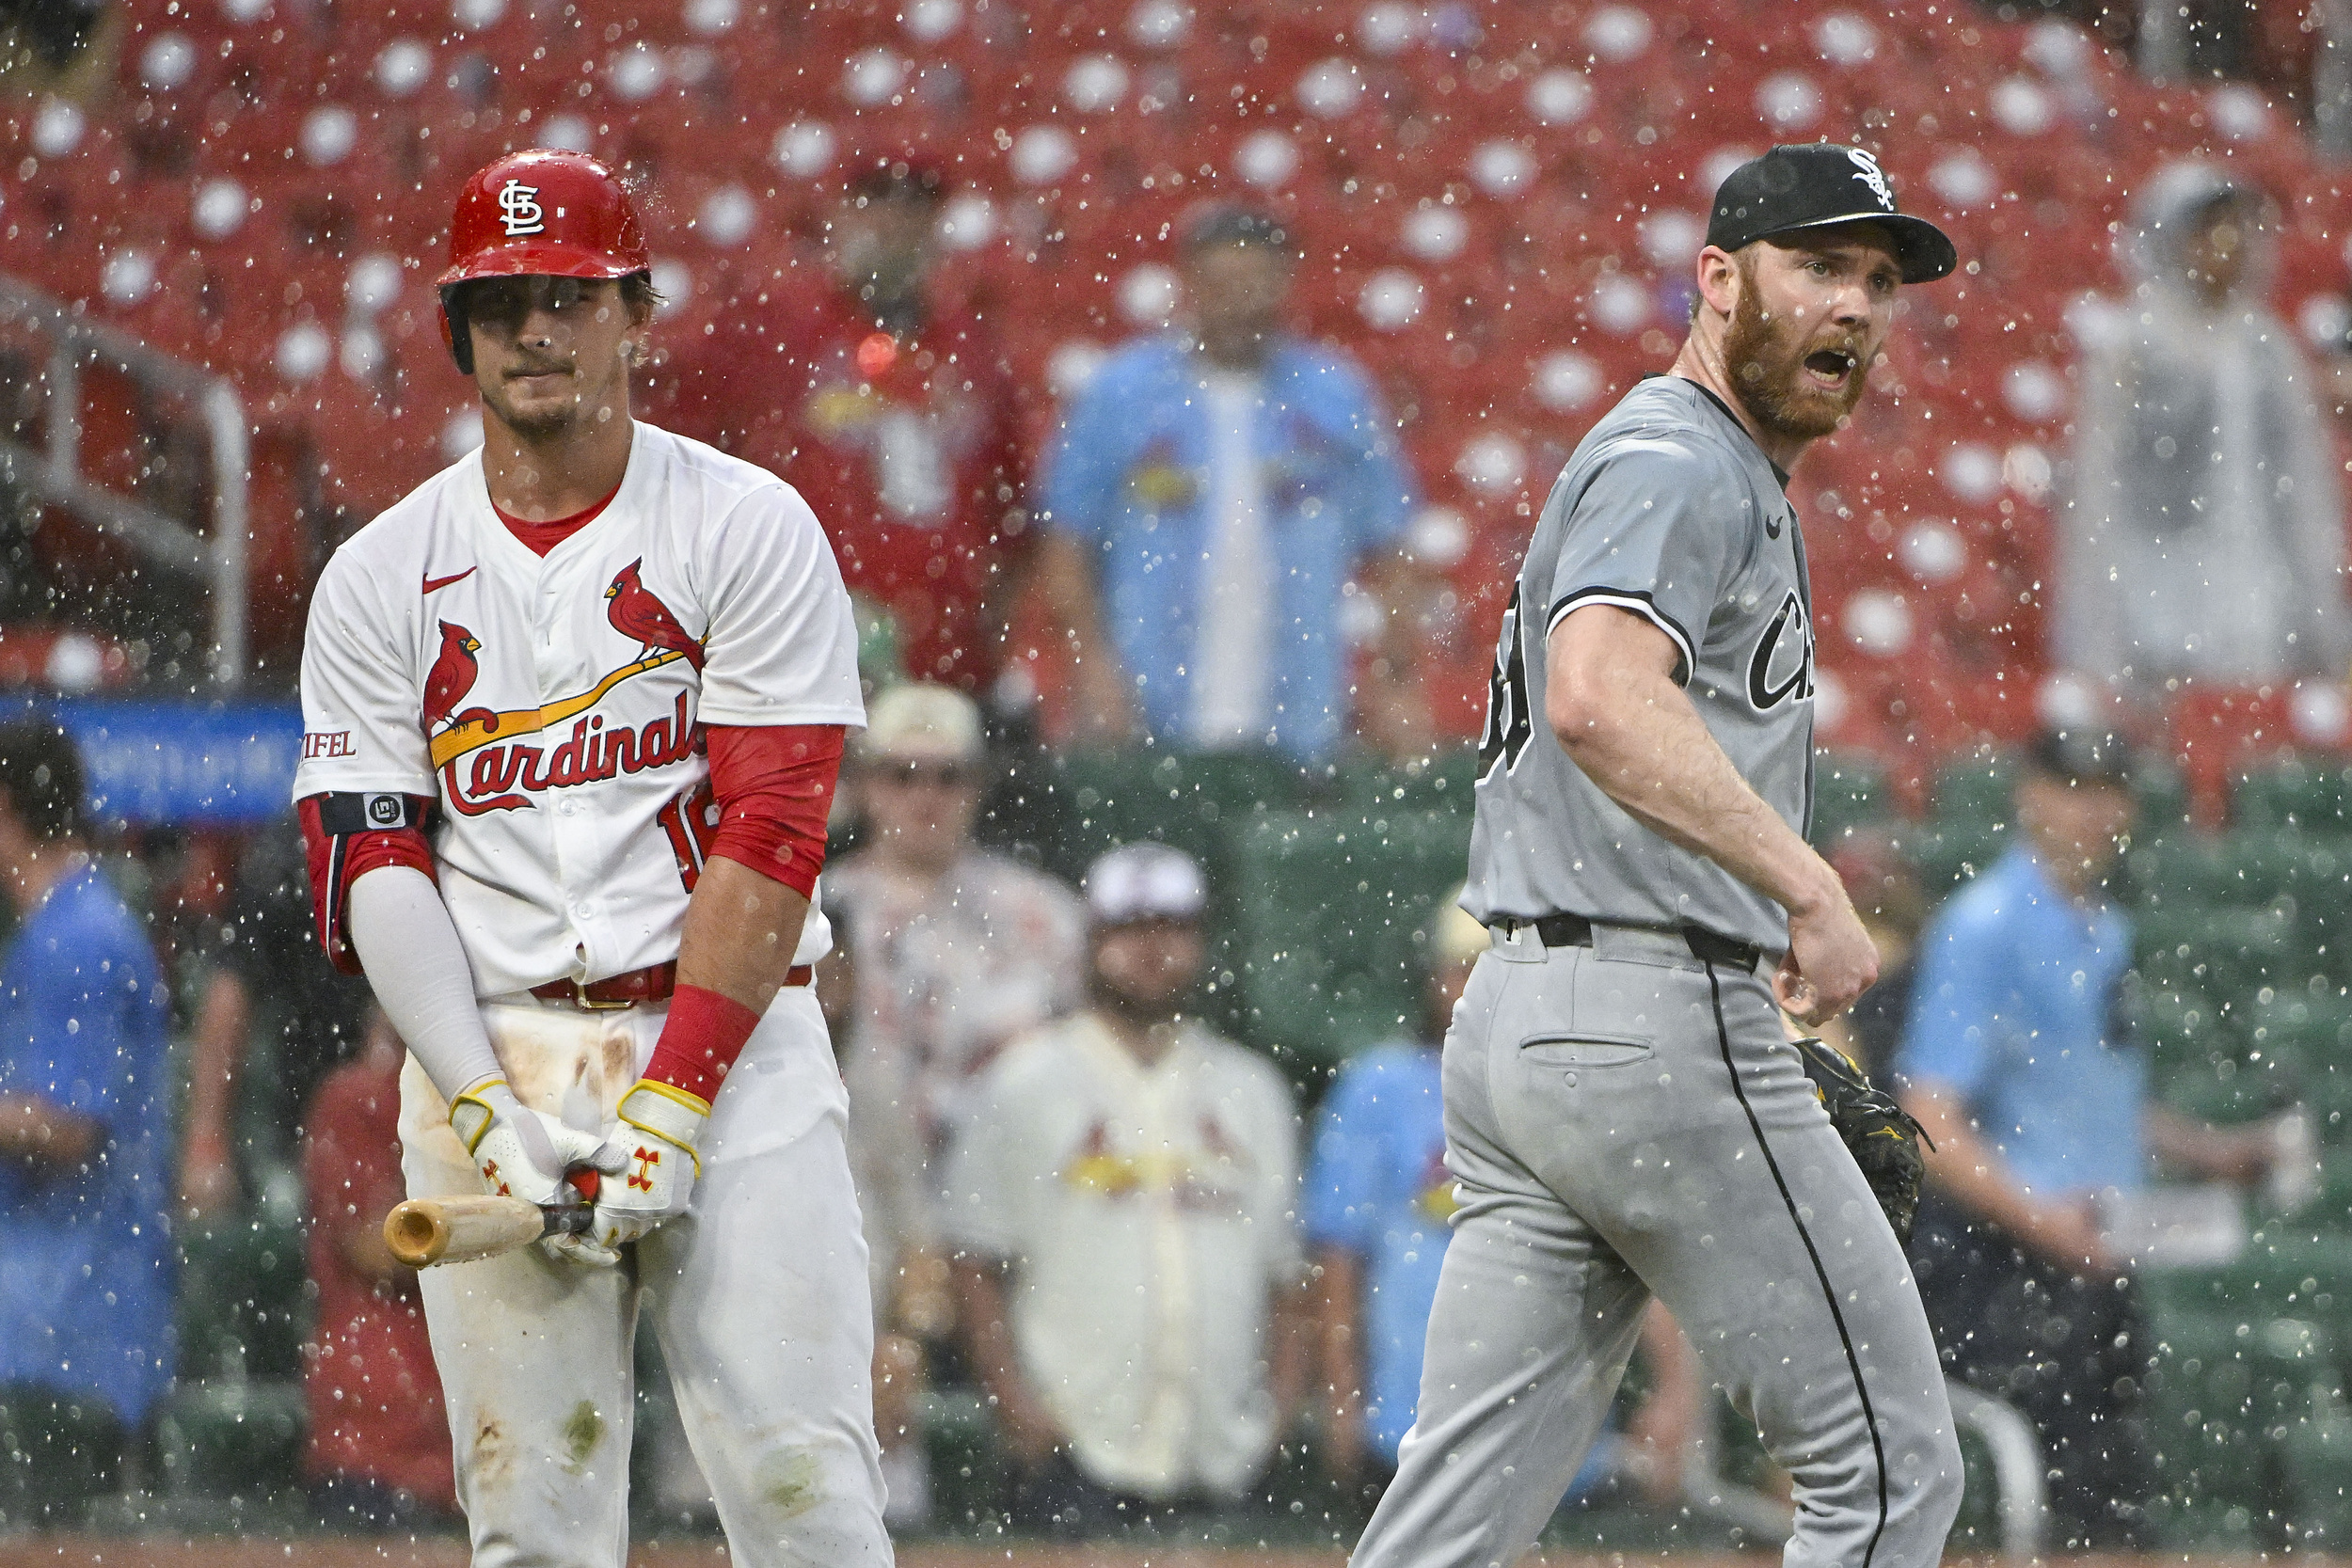 rain delay was called at the worst time possible in white sox-cardinals game